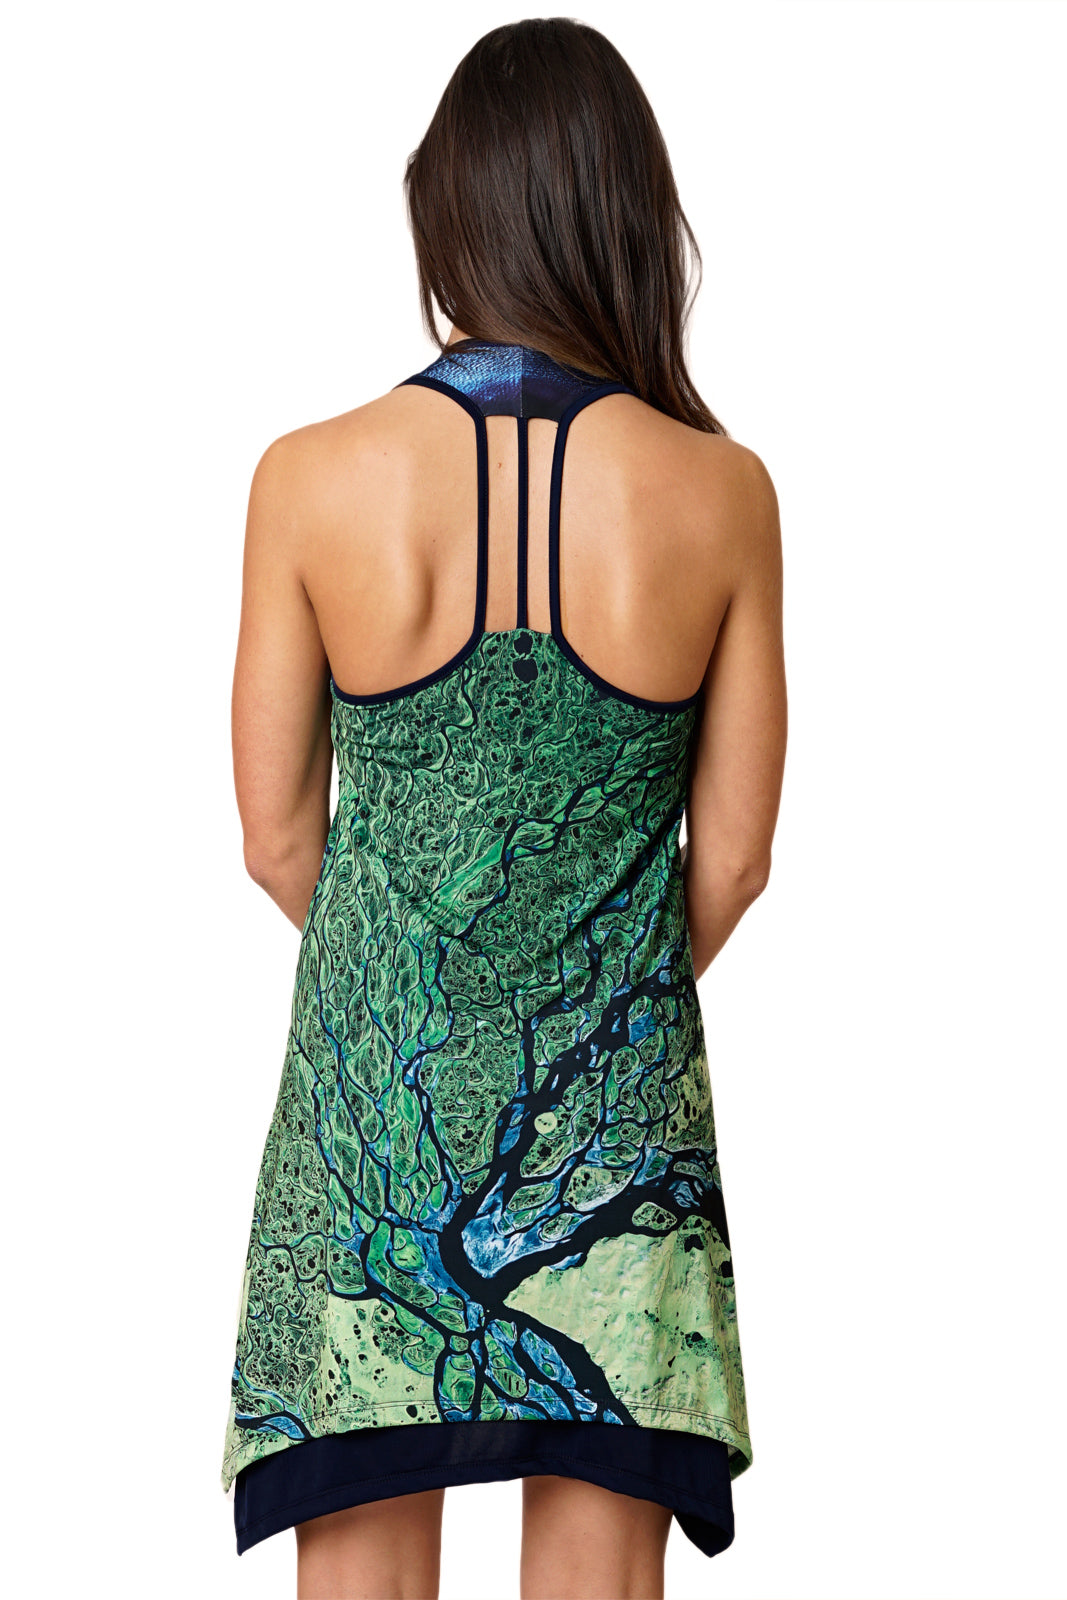 https://www.invisionsshop.com/cdn/shop/products/InVisions-Gypsy-Dress-National-Geographic-Clothing-Map-Dress-Nature_Clothing_2400x.jpg?v=1515273268